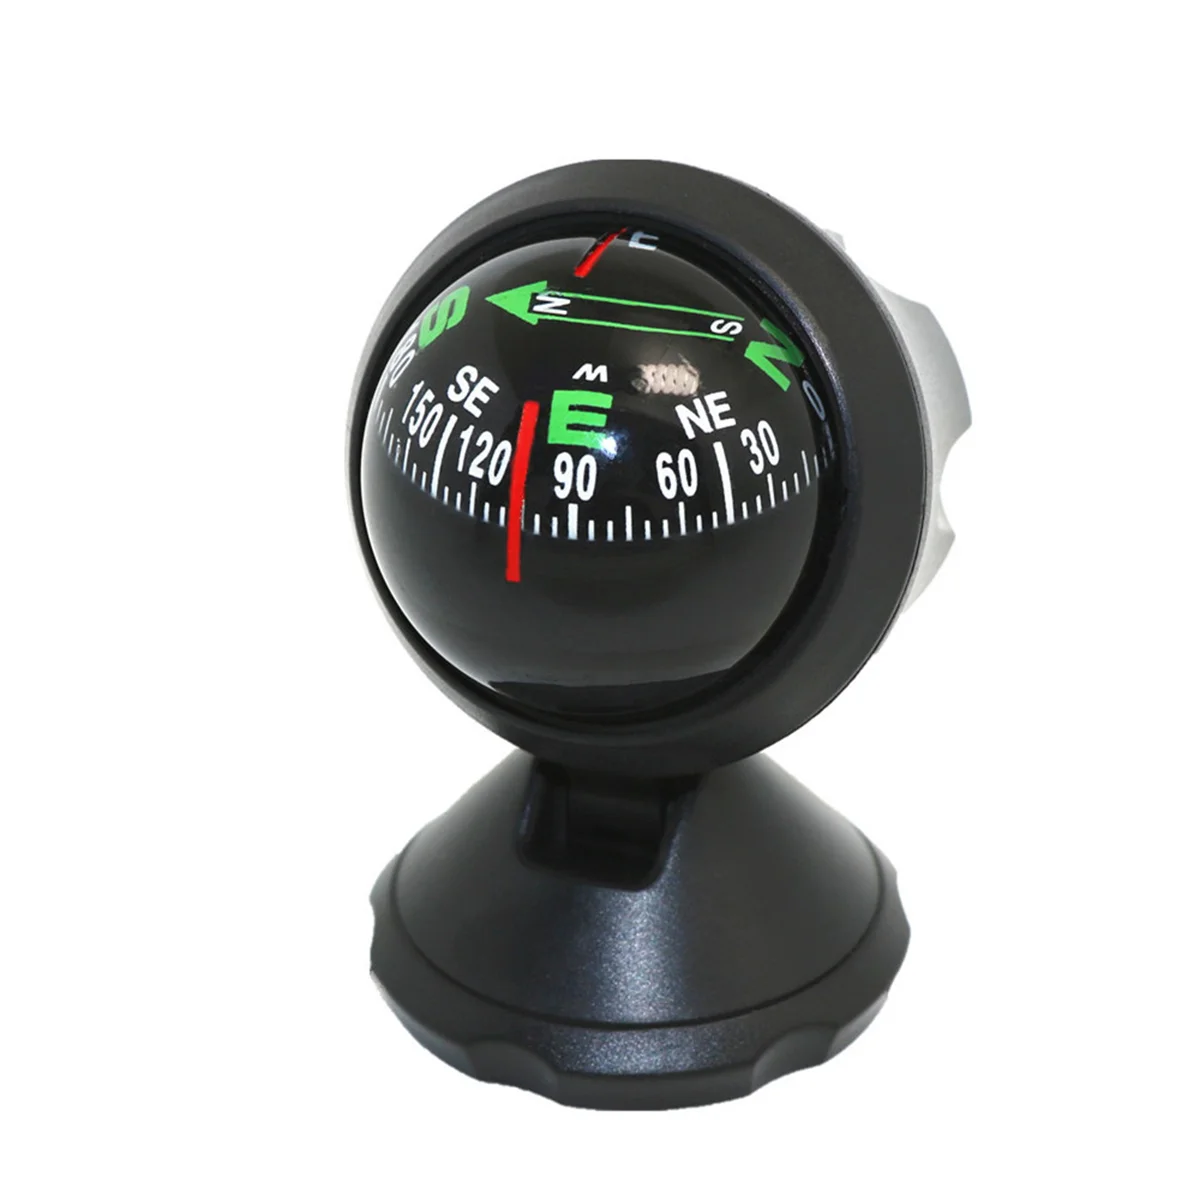 

Car Compass Auto Mini Compass Compact Ball Compass with Adhesive and Delicate Decoration Perfect Camping gadgets Compasses